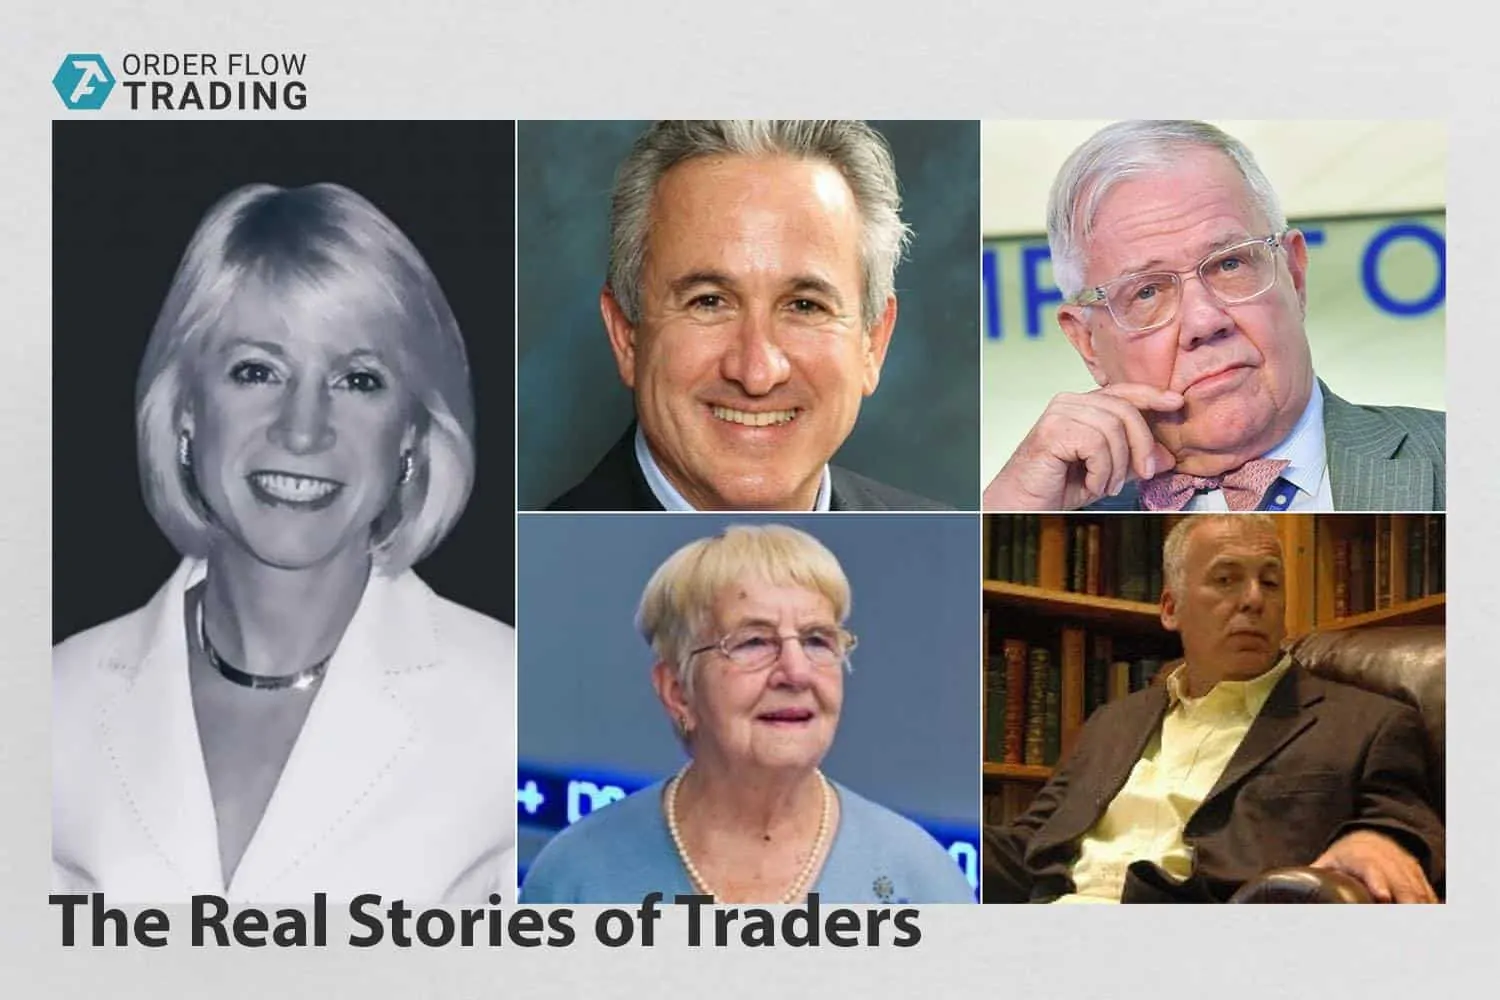 Real trader stories. Failures and successes.